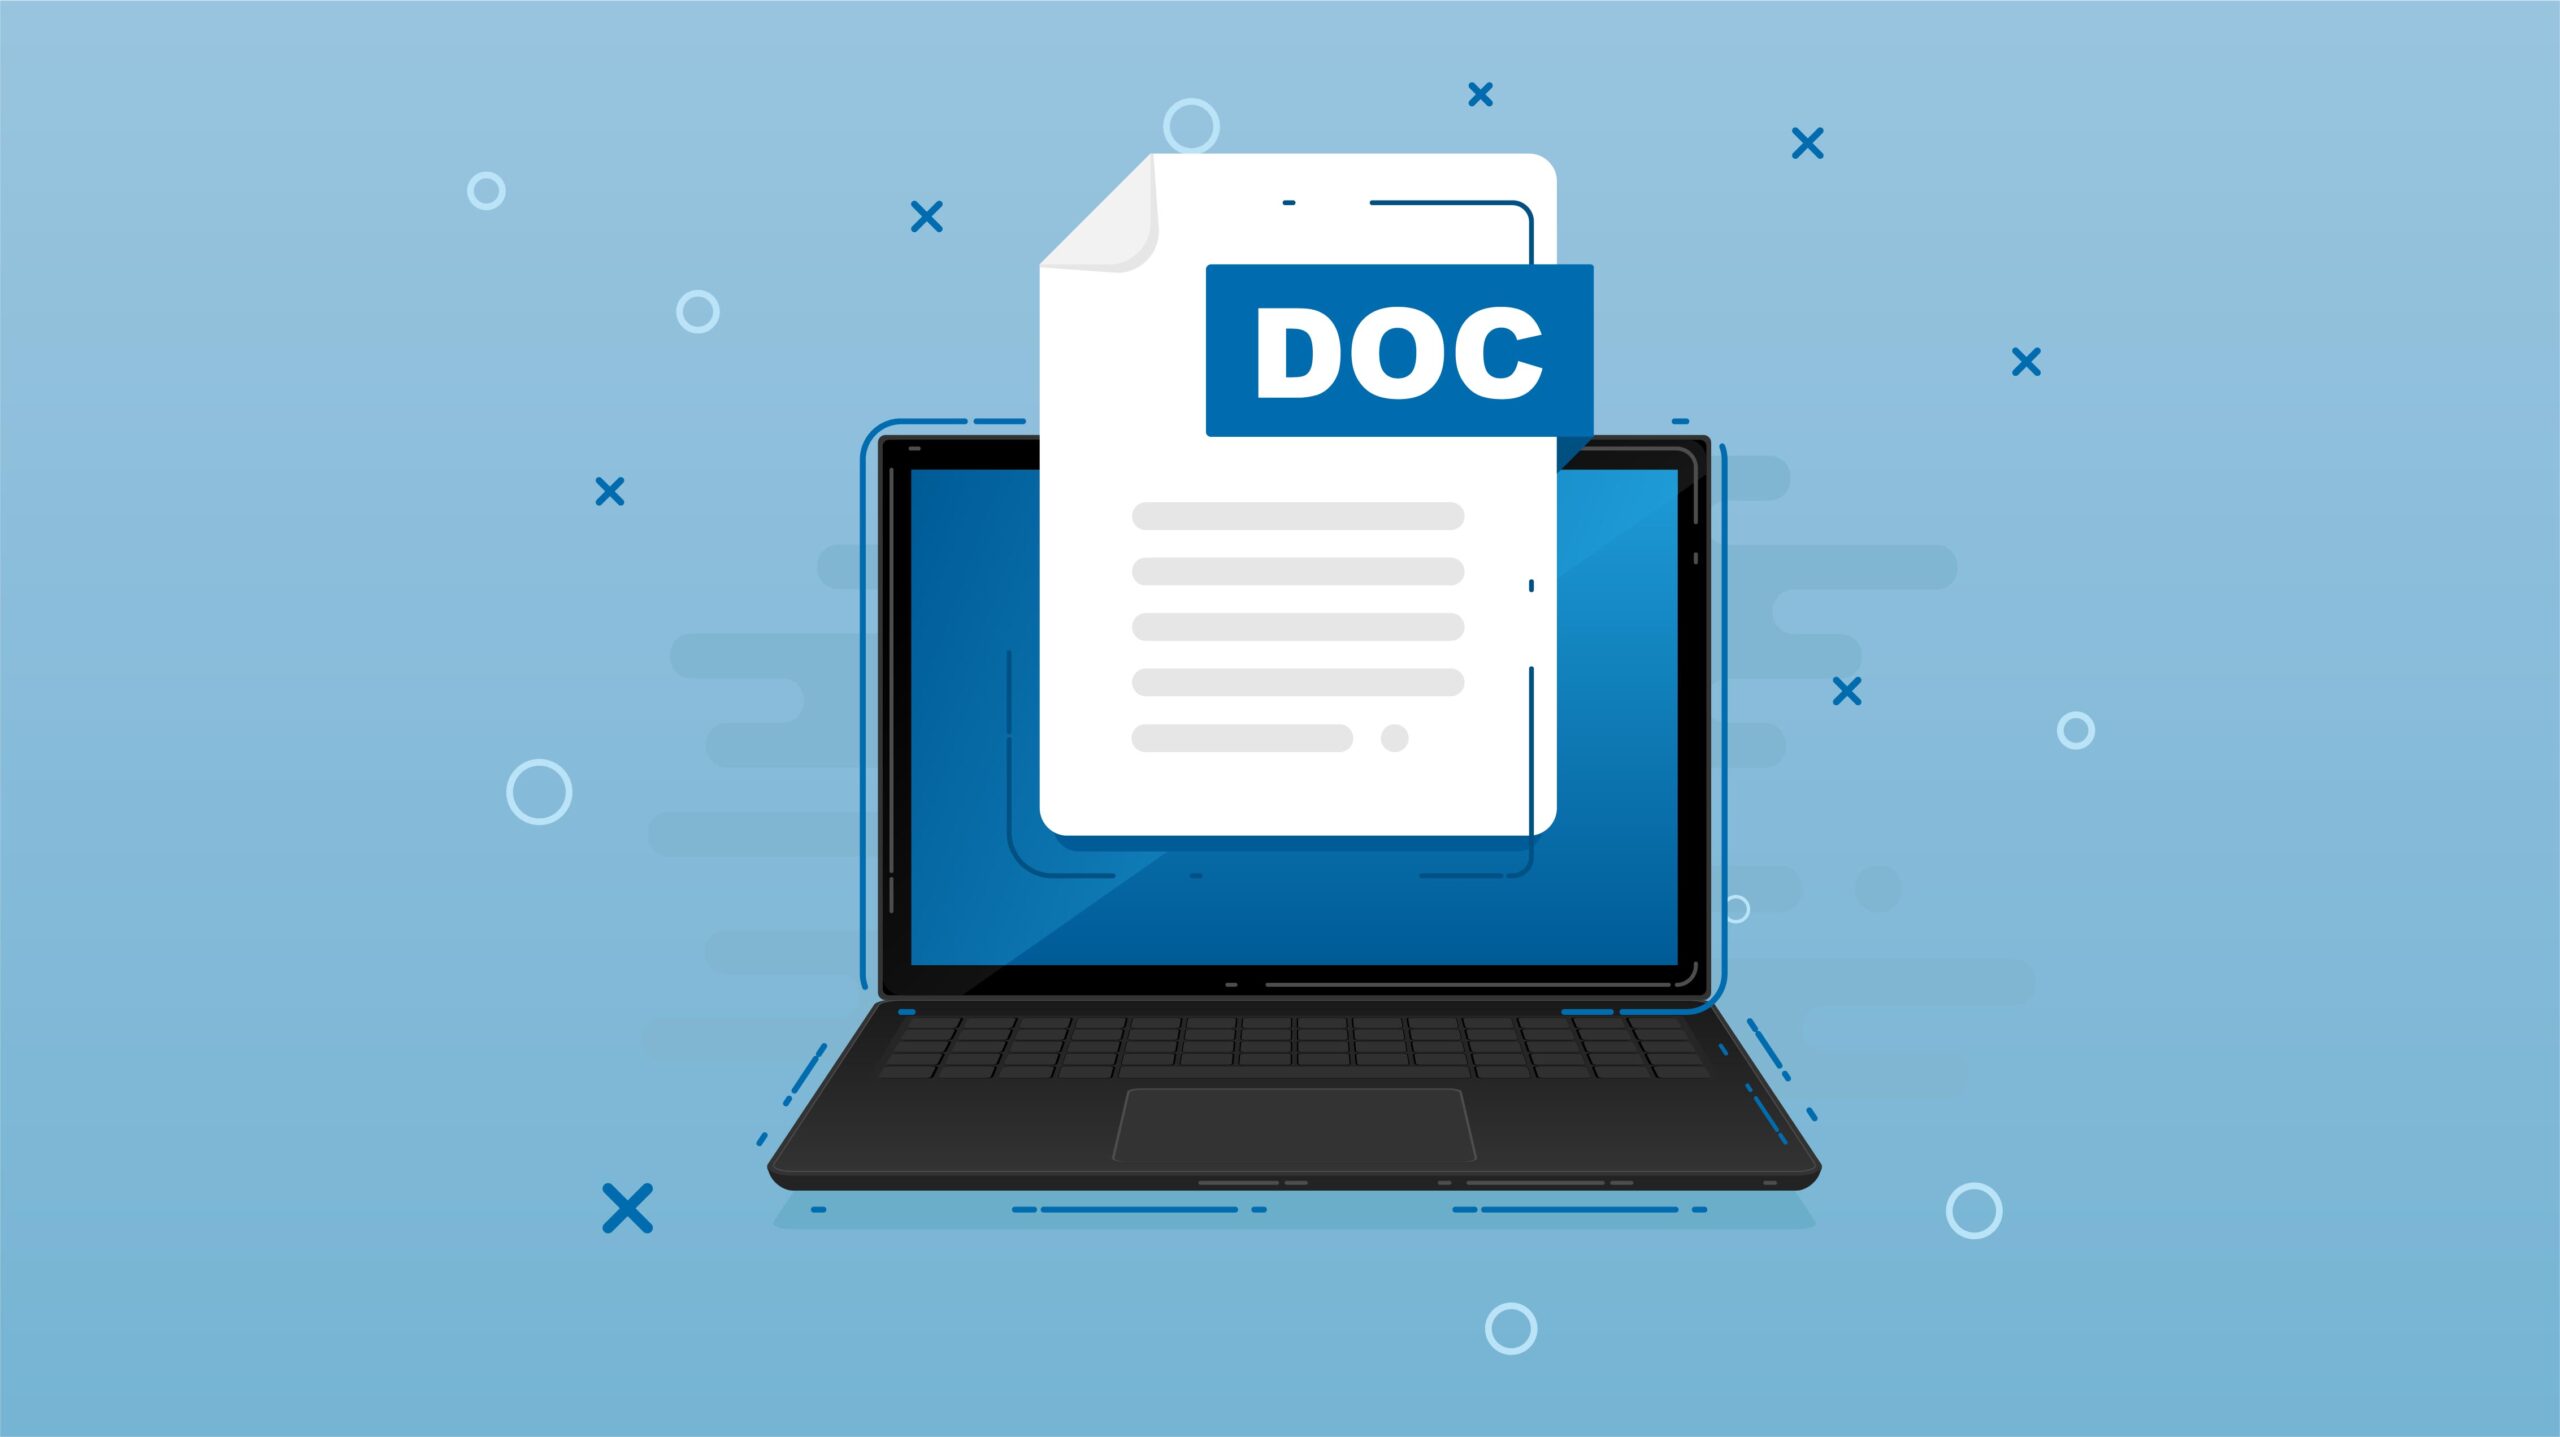 How to Add a Page in Google Docs and 9 Other Great Tips